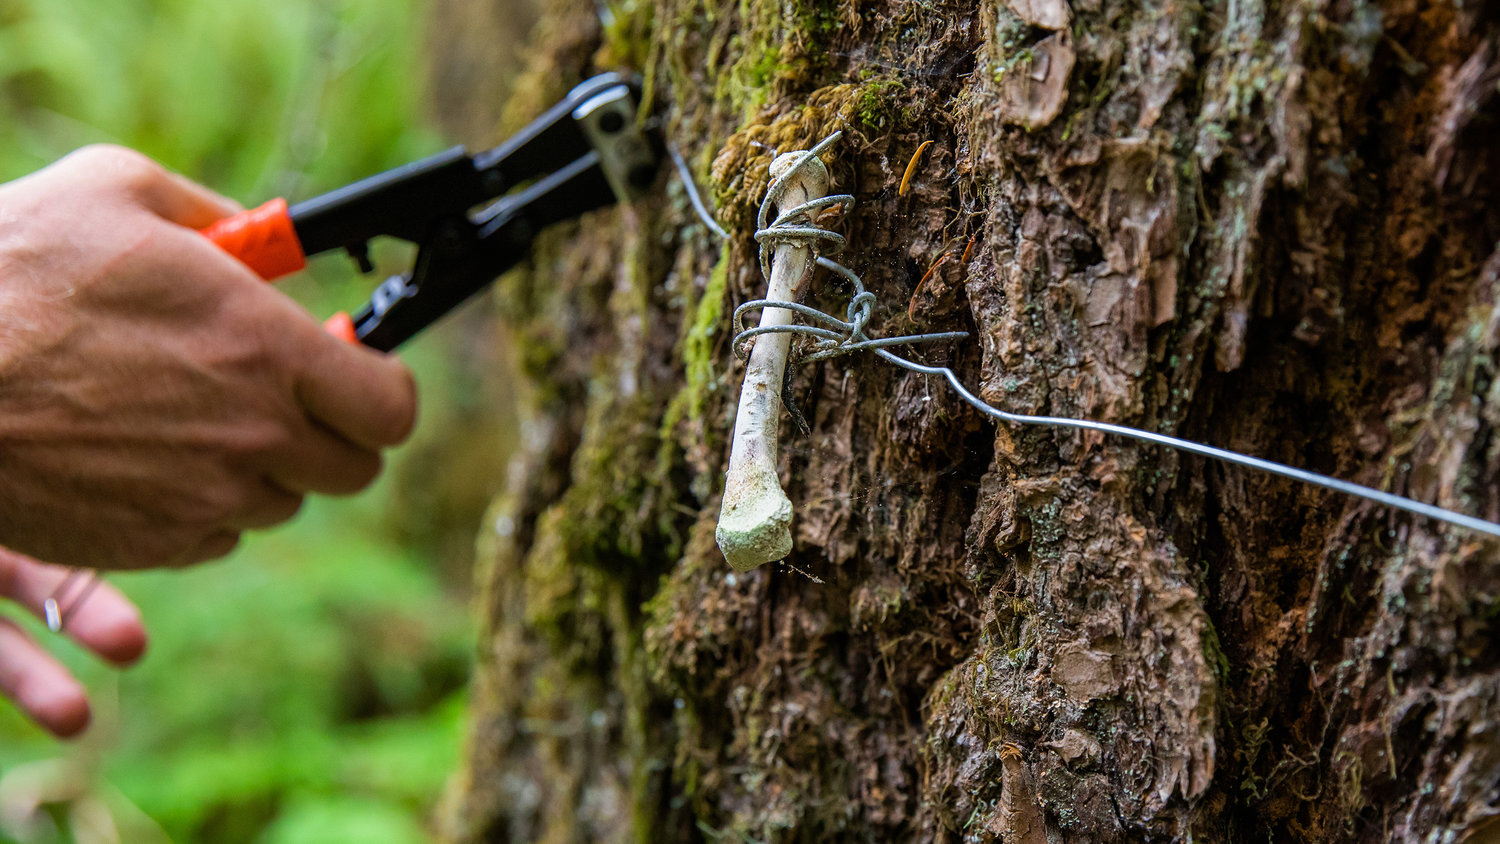 A chicken leg wrapped around a tree with wire was used as bait in front of a game camera.